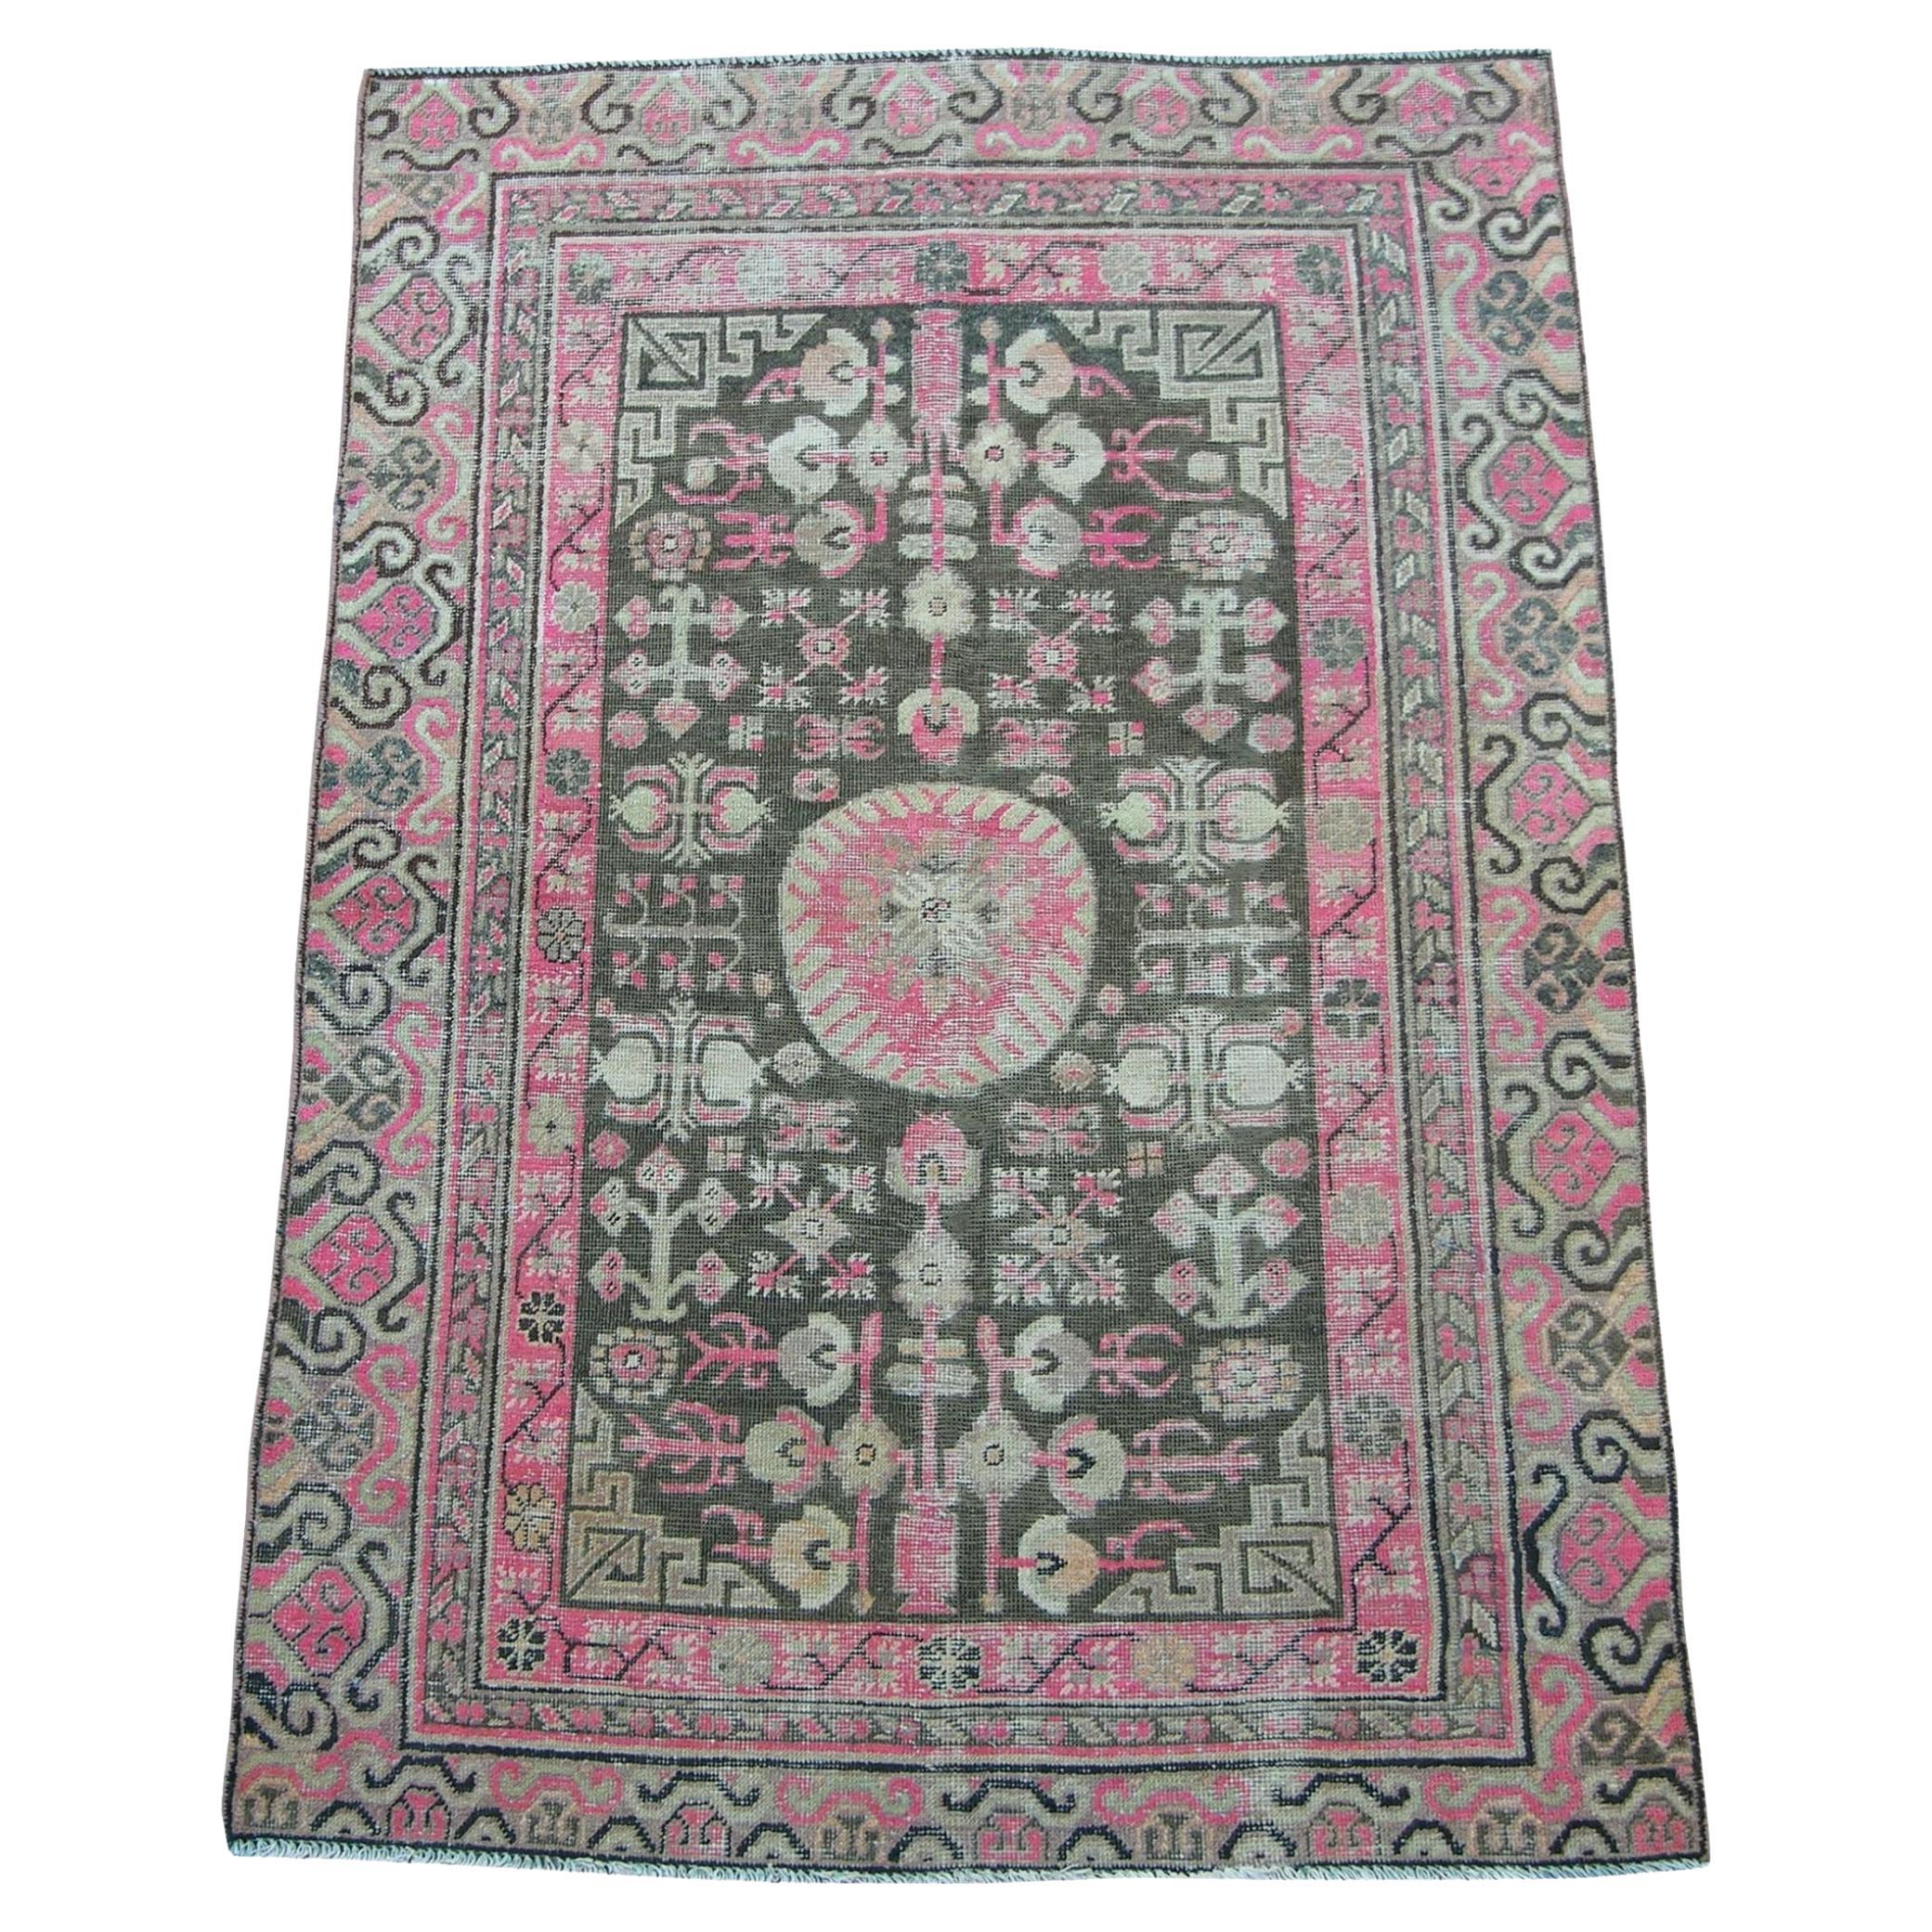 Early 20th Century Antique Khotan Samarkand Rug For Sale